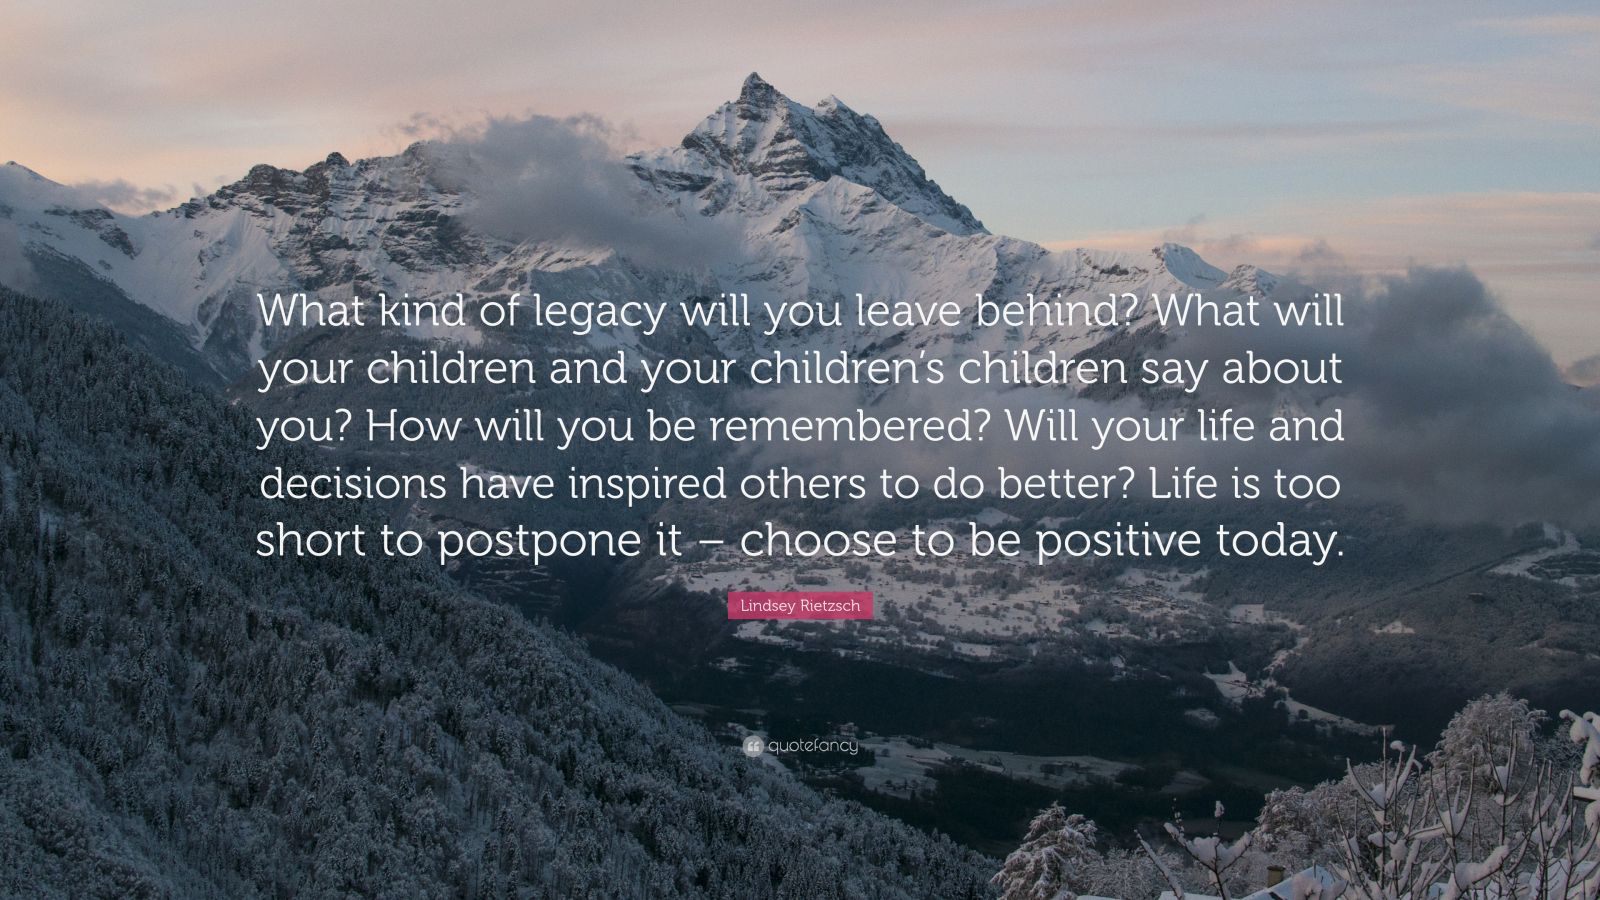 What will you Leave Behind as you Leadership Legacy?